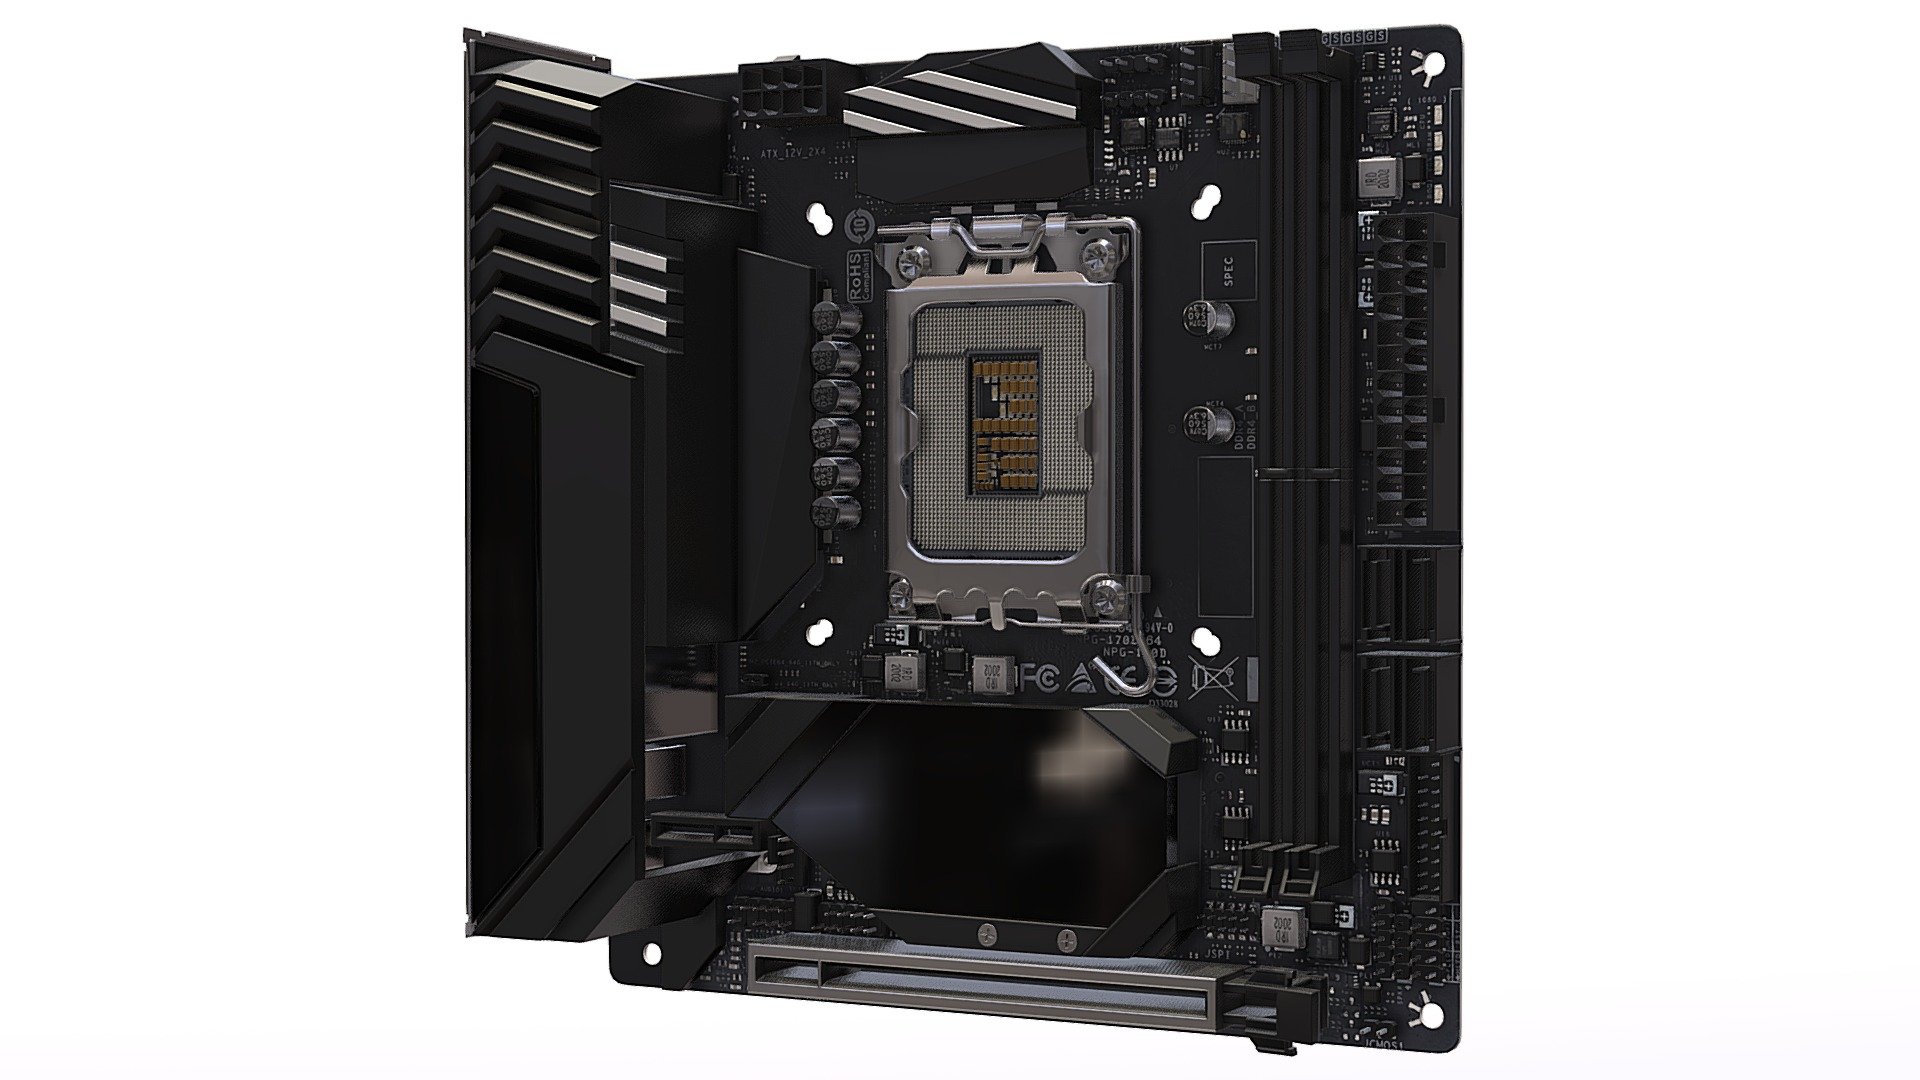 High-detailed 3d model of Generic miniITX motherboard

Ready to use in any software

For questions about 3d models write here: andreyfedyushov@gmail.com - Motherboard miniITX - 3D model by digitalrazor3d 3d model